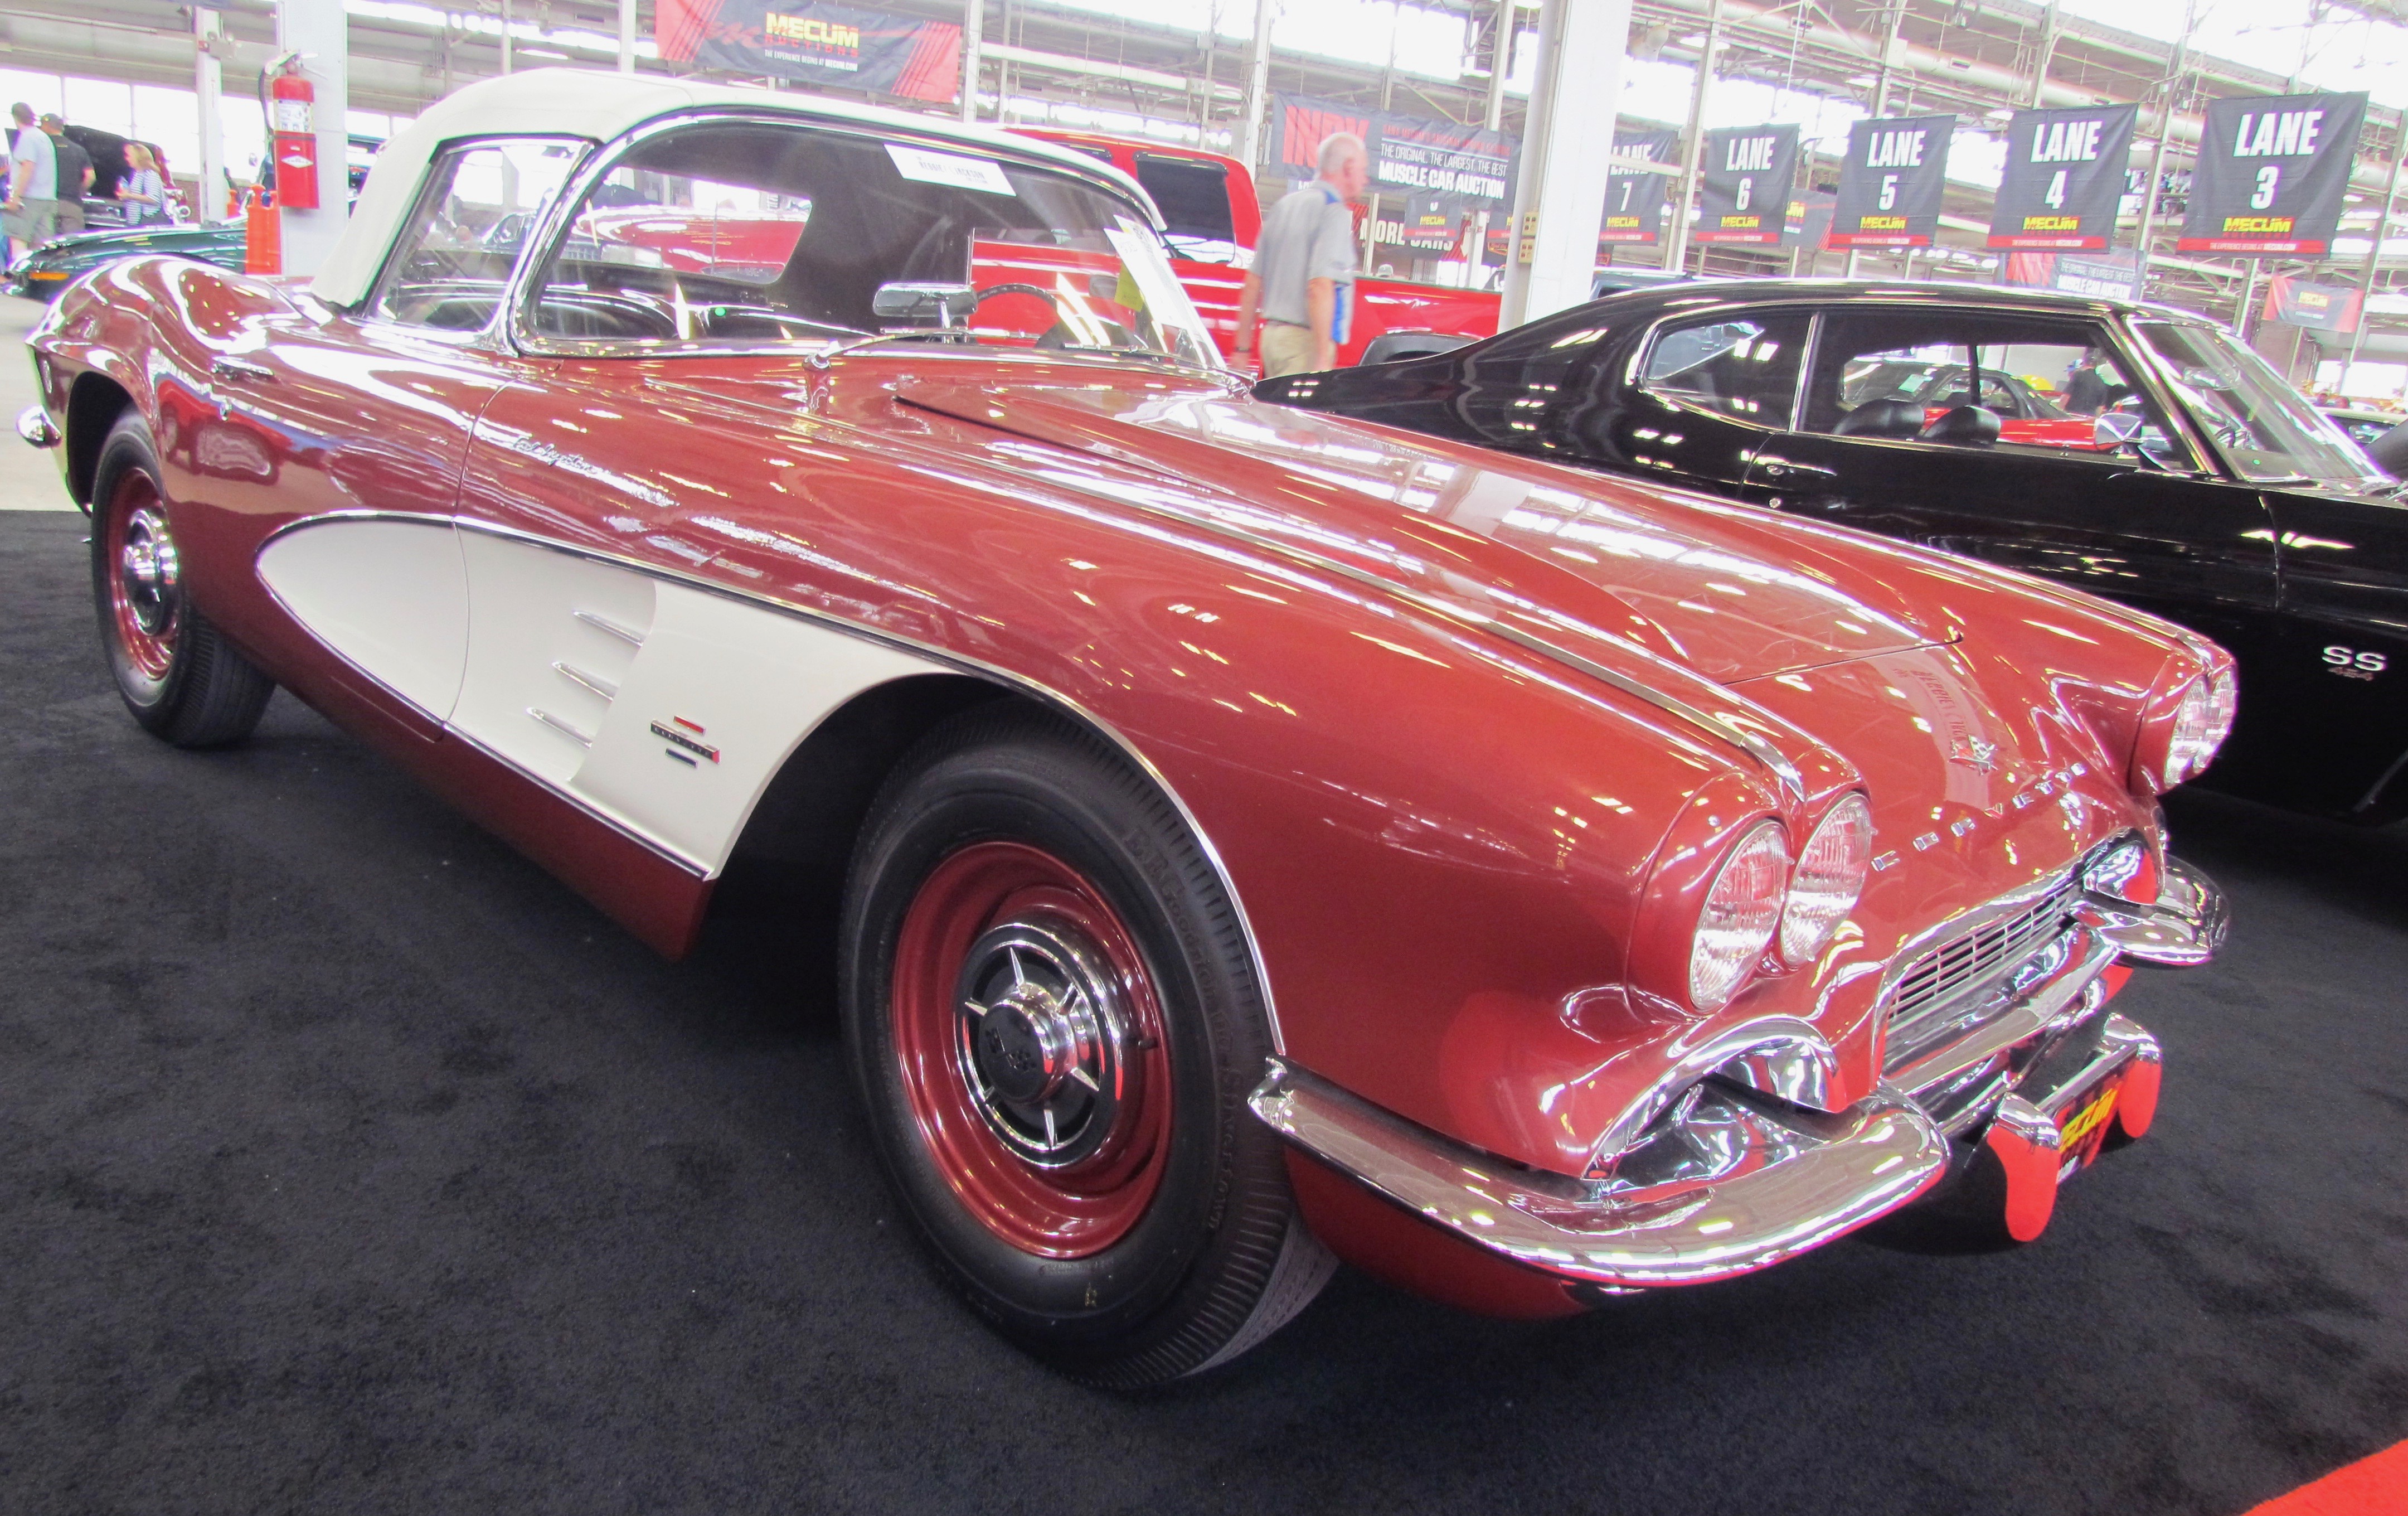 Mecum, Larry’s long list of cars he likes at Mecum’s Indy auction, ClassicCars.com Journal